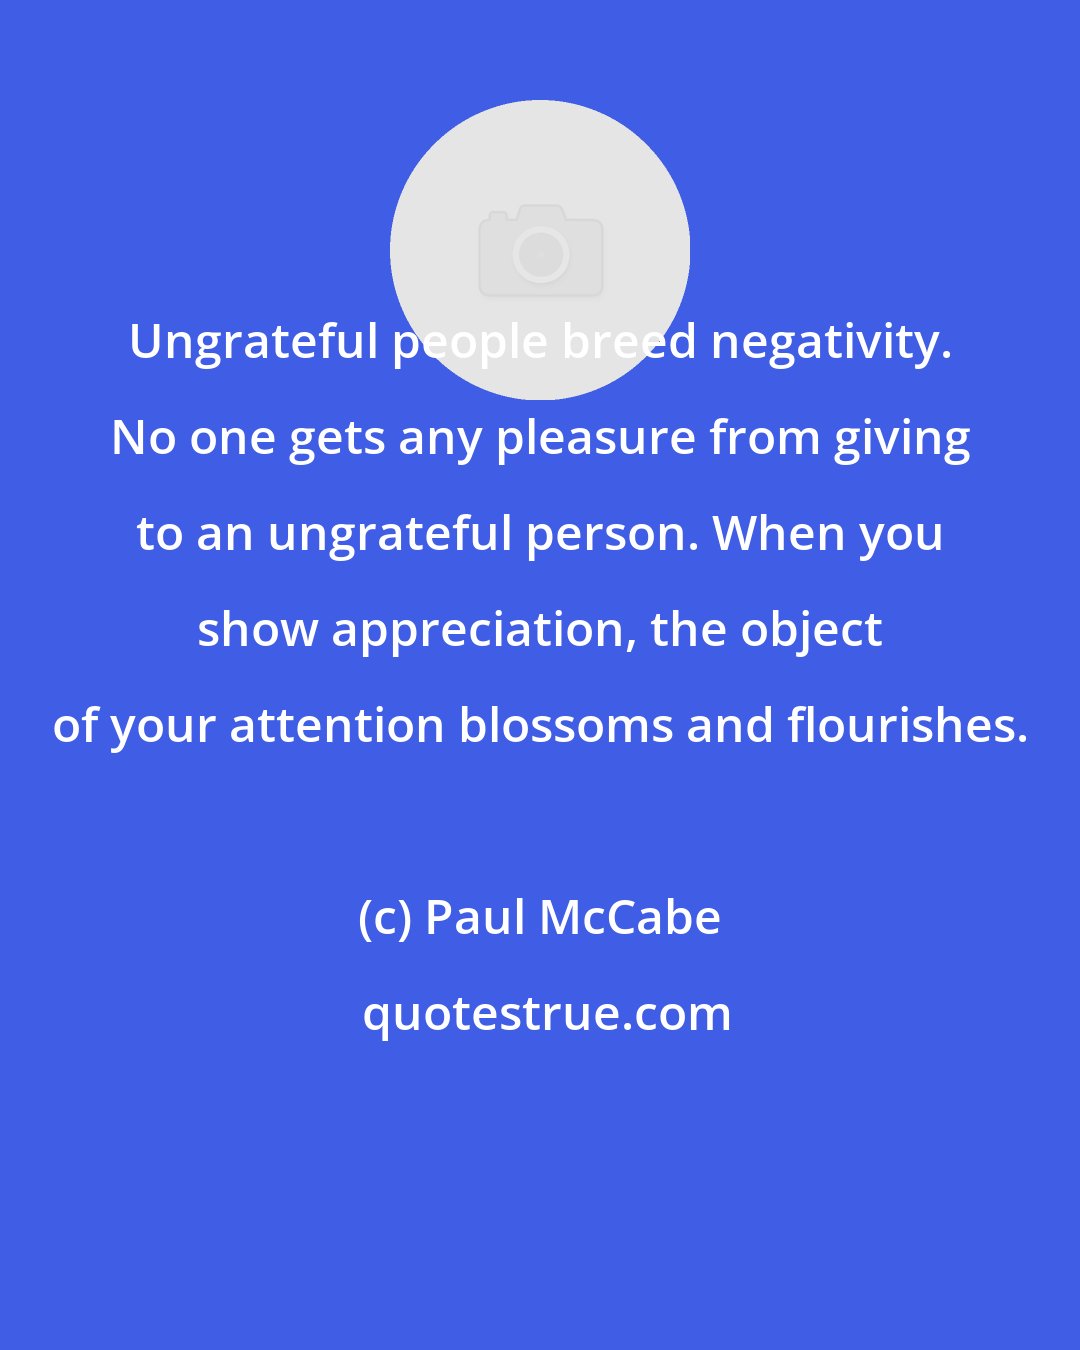 Paul McCabe: Ungrateful people breed negativity. No one gets any pleasure from giving to an ungrateful person. When you show appreciation, the object of your attention blossoms and flourishes.